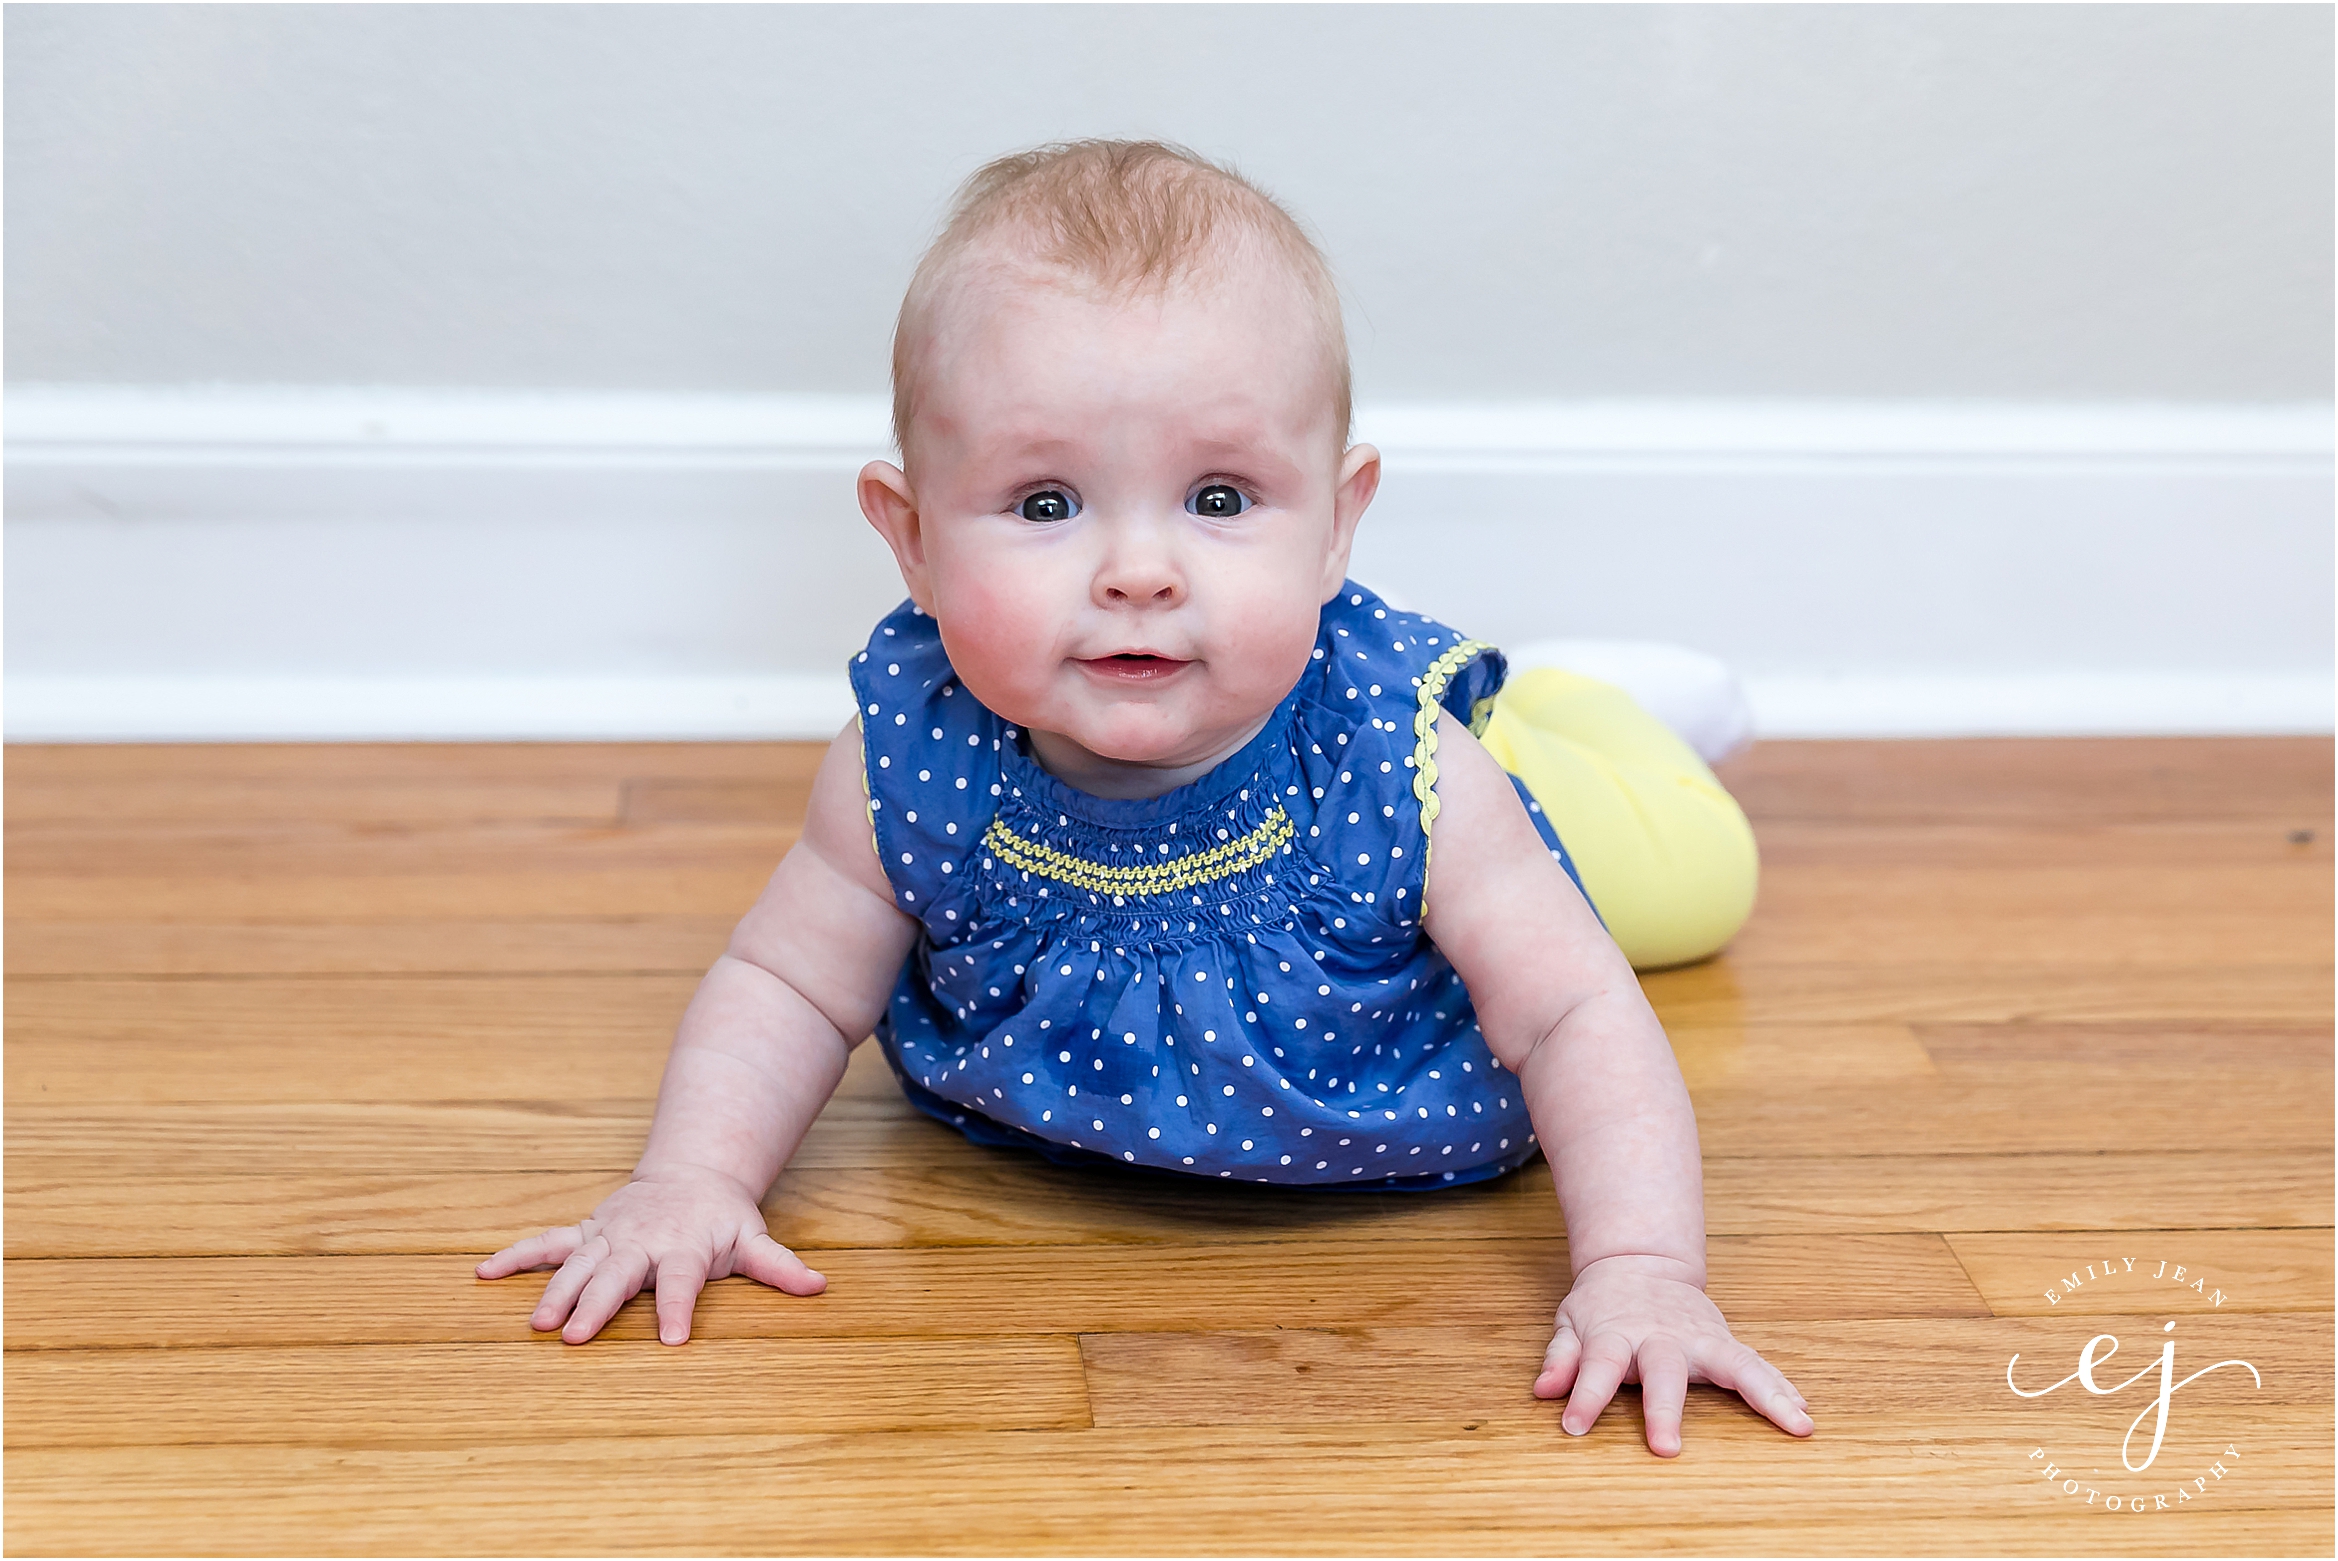 Smiling little baby girl on wood floor five month old portrait